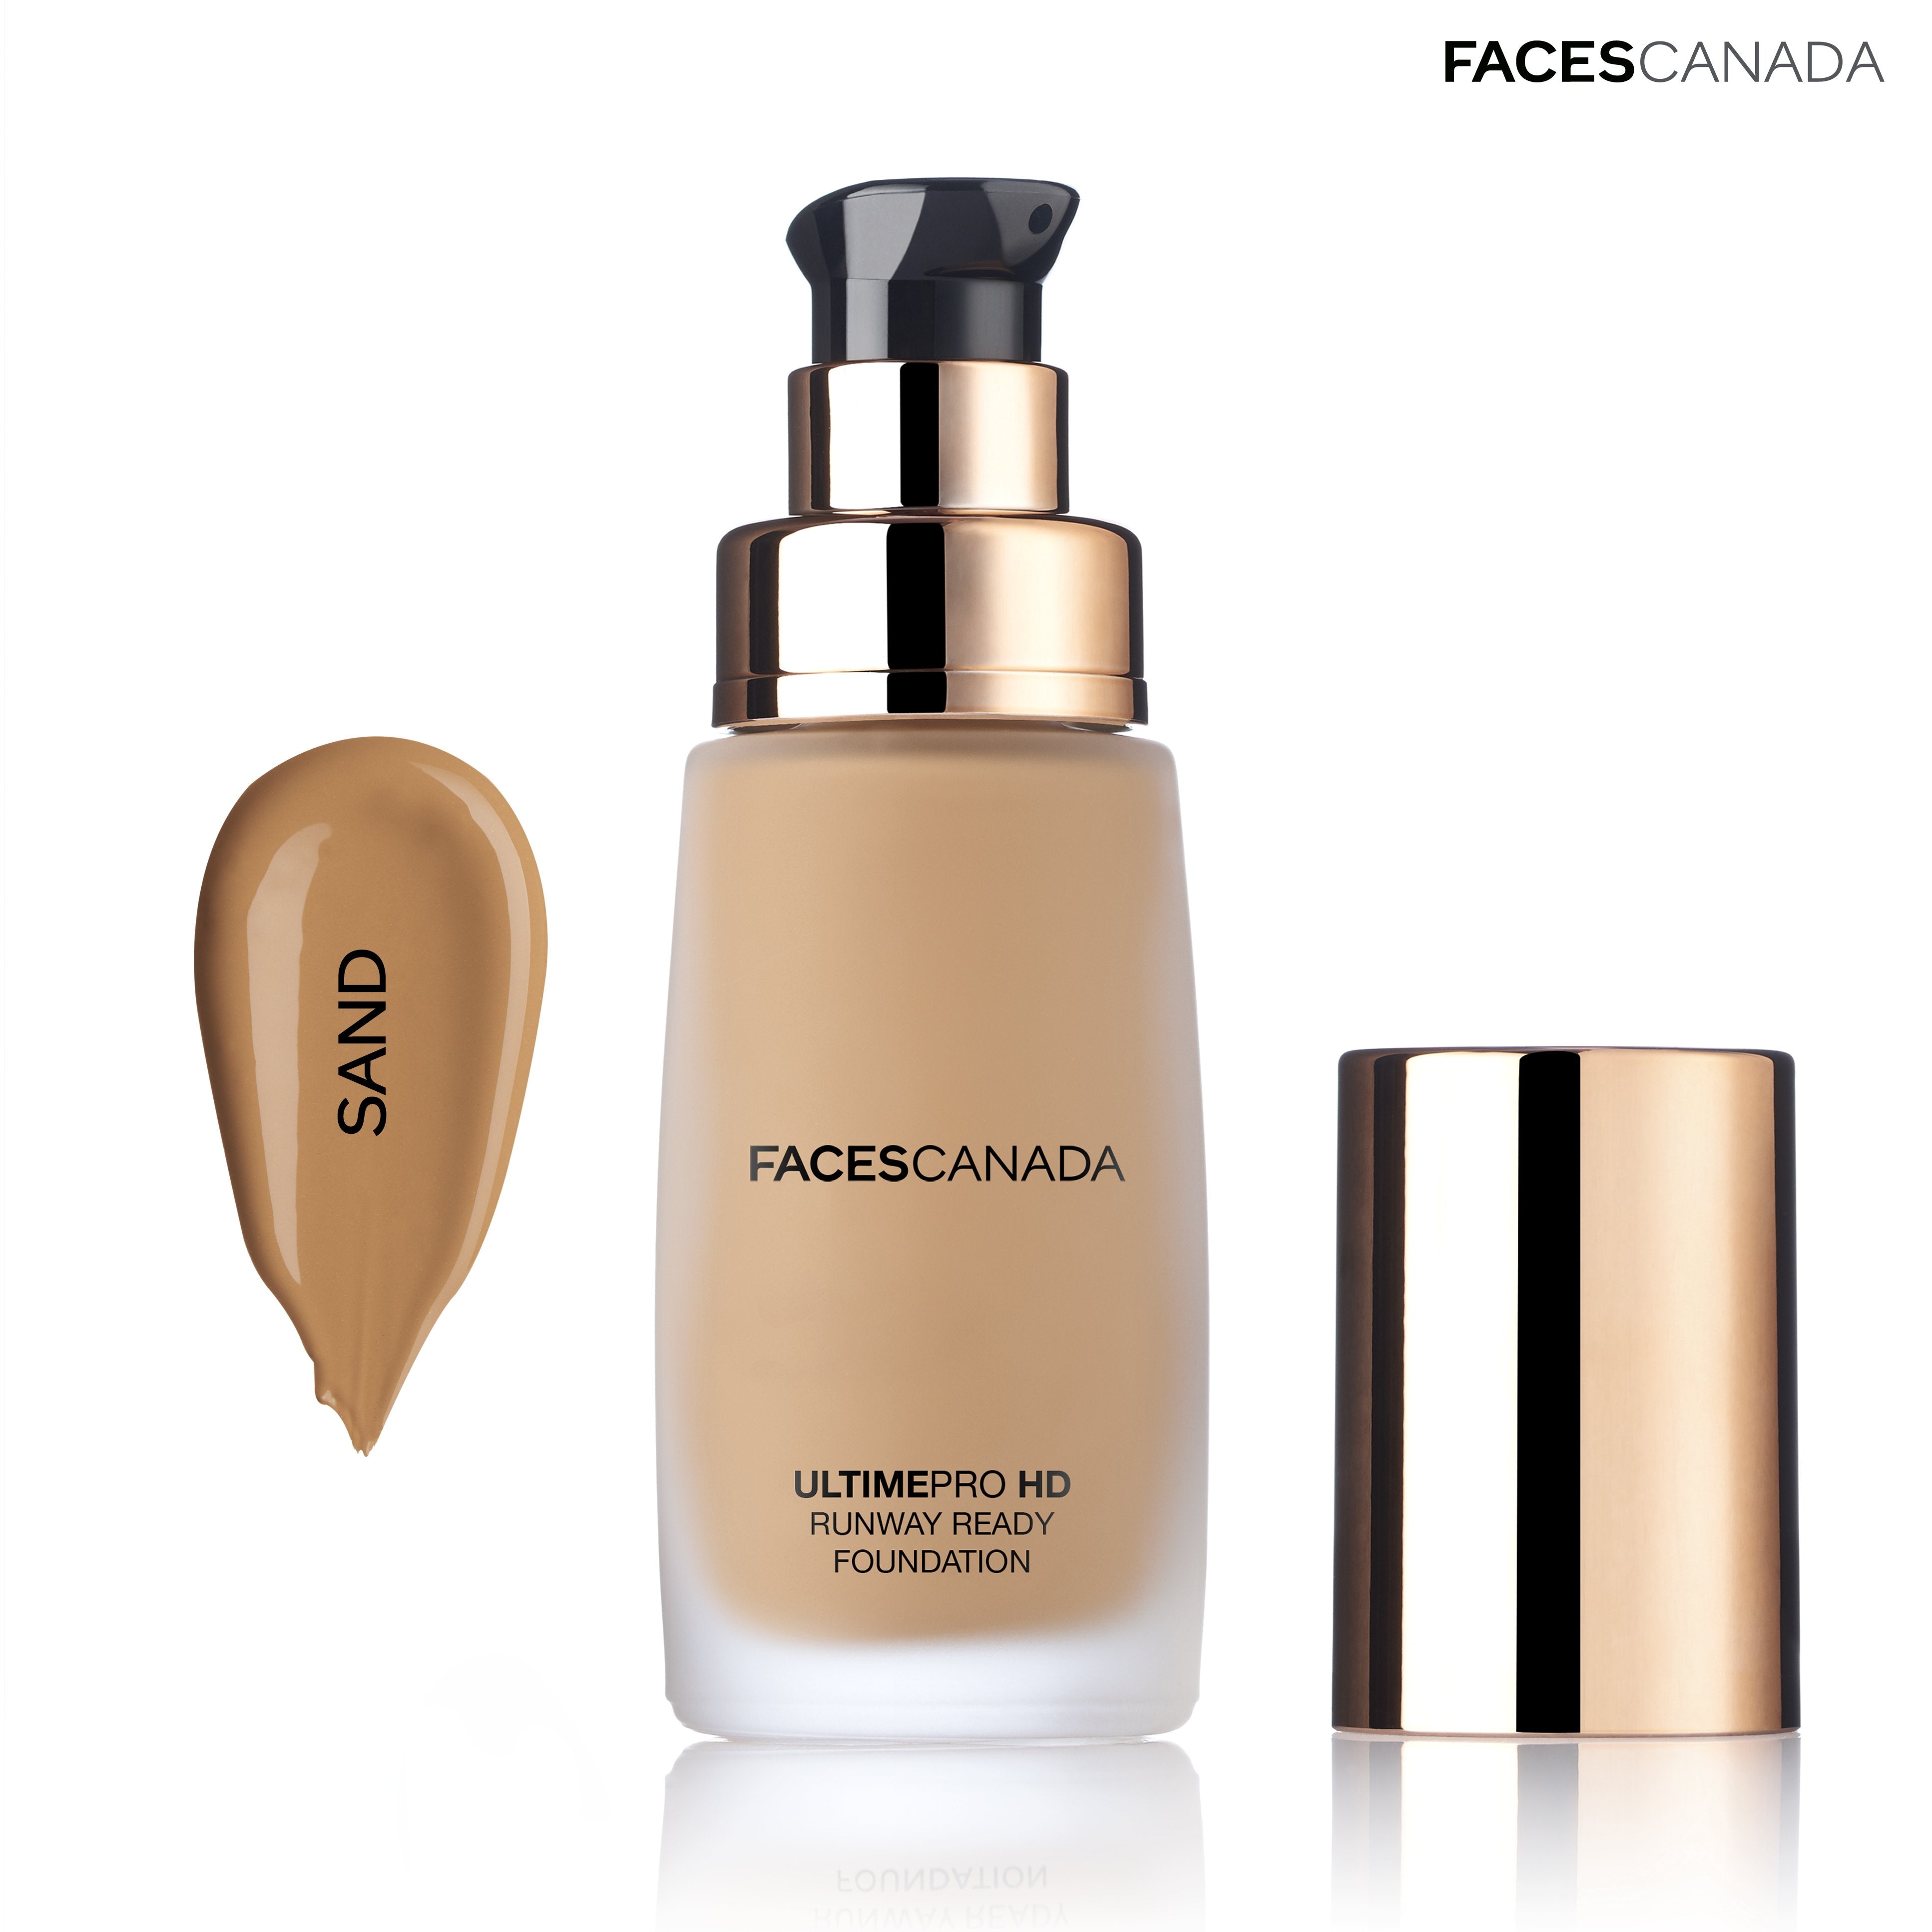 Faces Canada Ultime Pro HD Runway Ready Foundation (30ml) Faces Canada